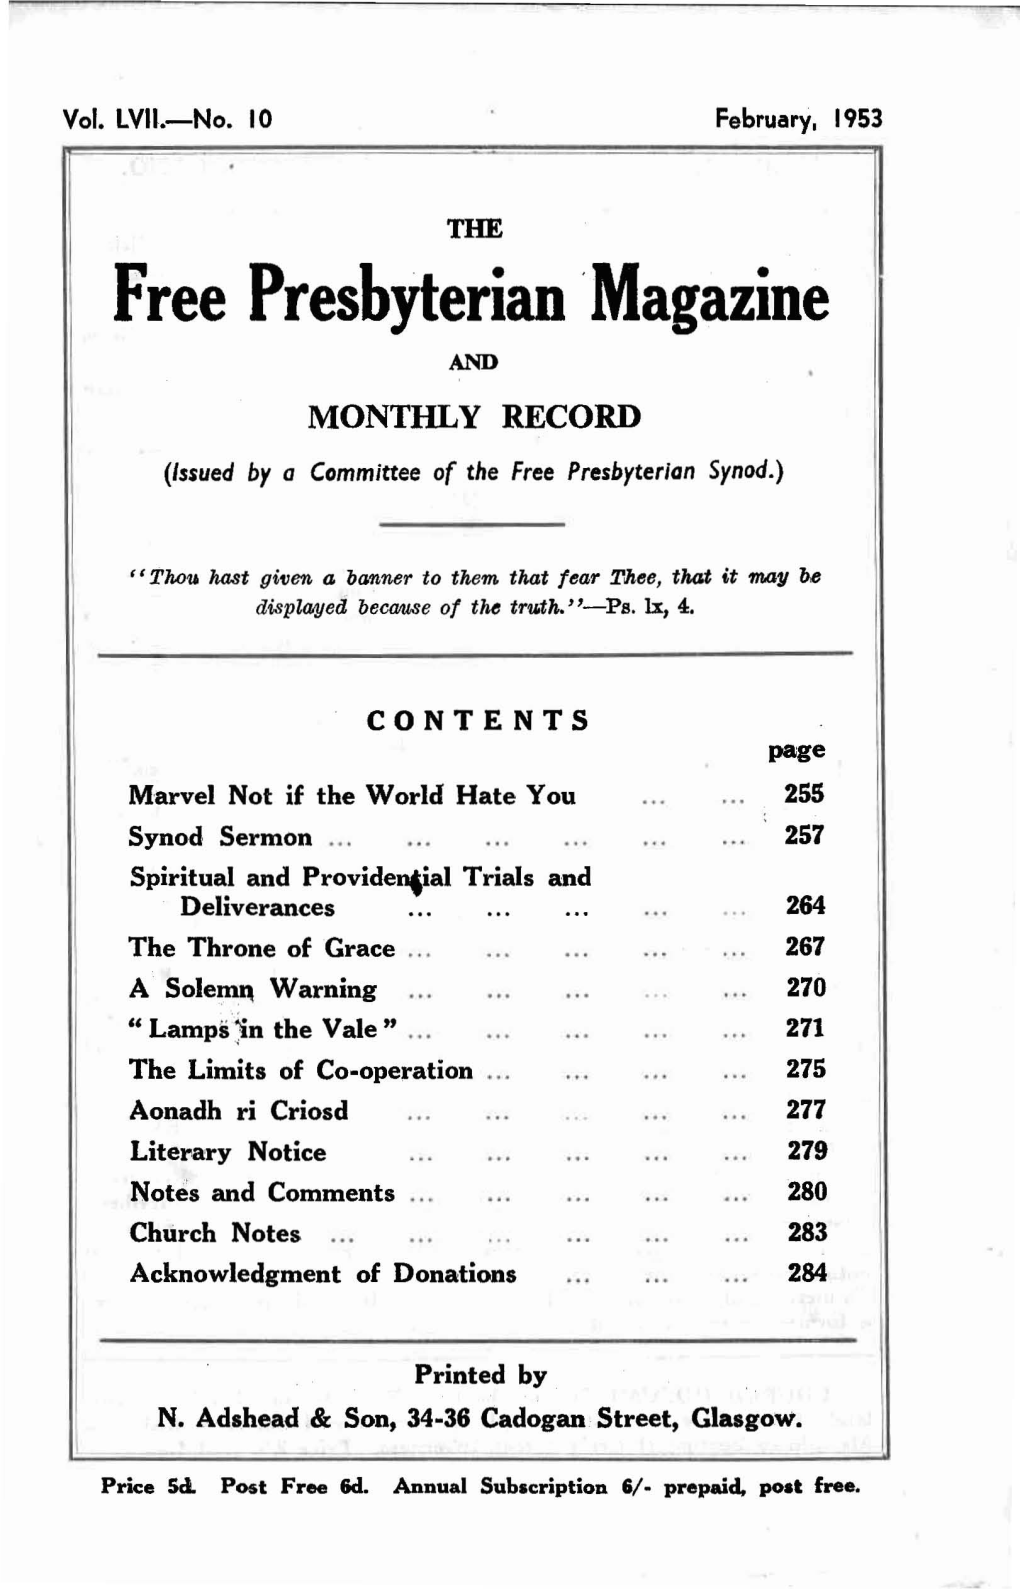 Magazine and MONTHLY RECORD (Issued by a Committee of the Free Presbyterian Synod.)